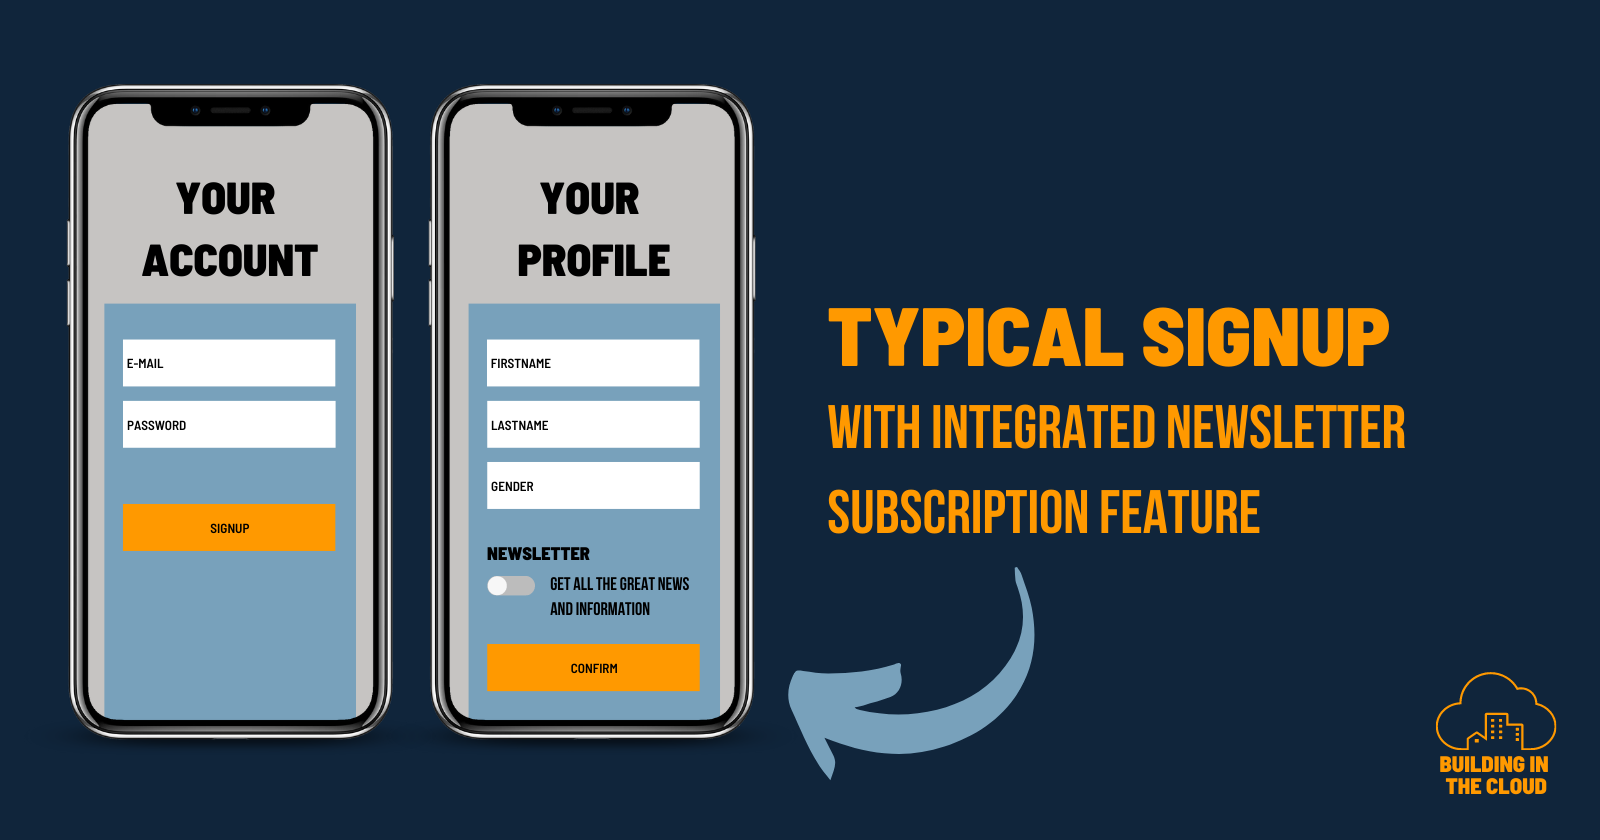 A typical signup with integrated newsletter subscription feature